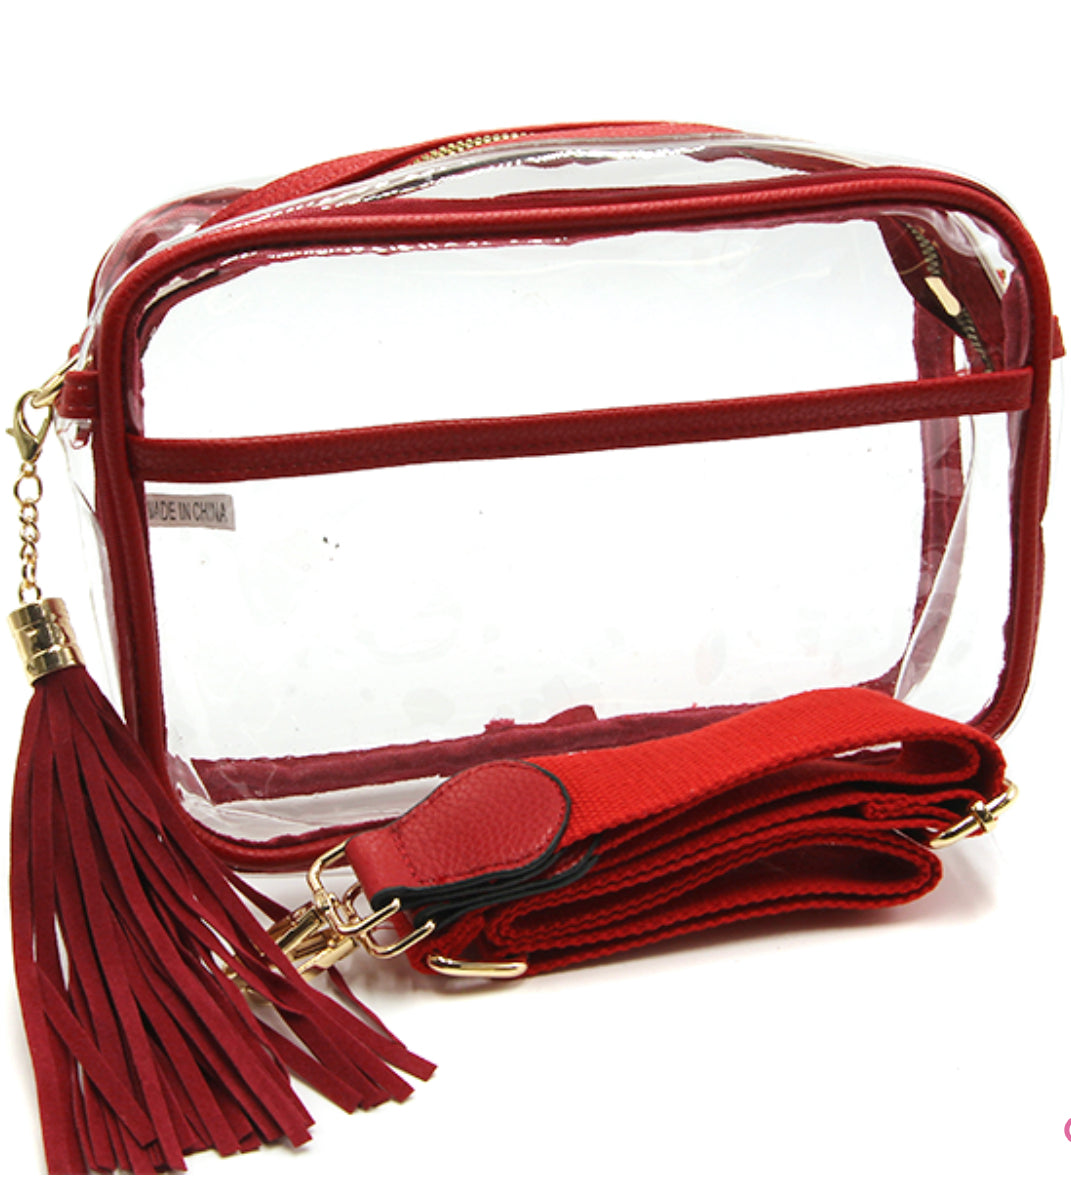 Clear Rectangular Crossbody Purse with Red Trim